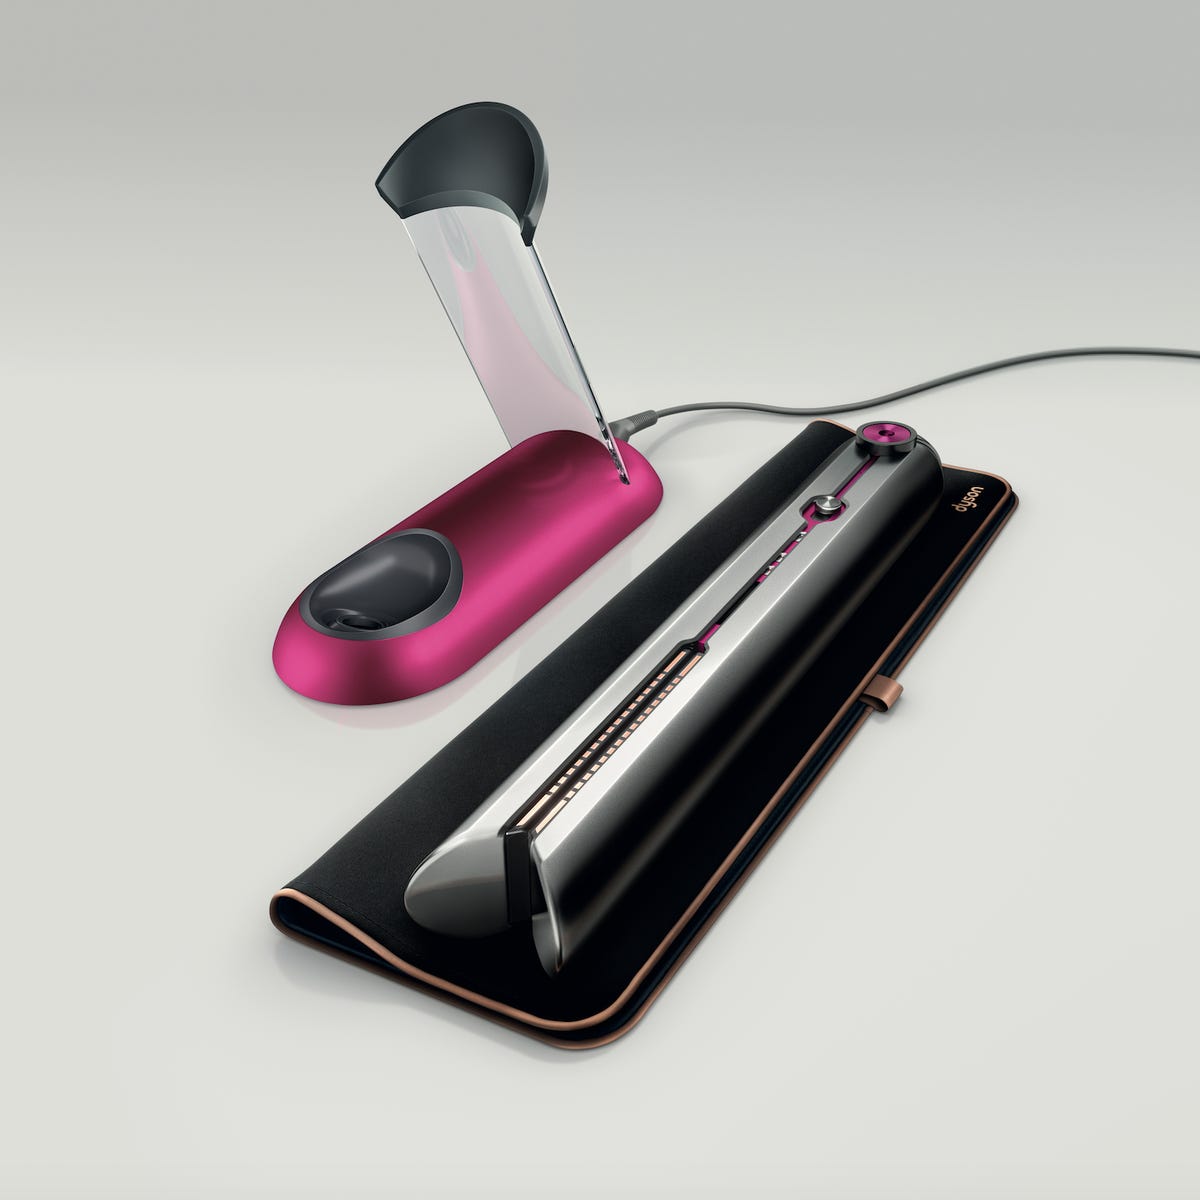 Dyson's $500 Corrale straightener is a cordless, luxury styling